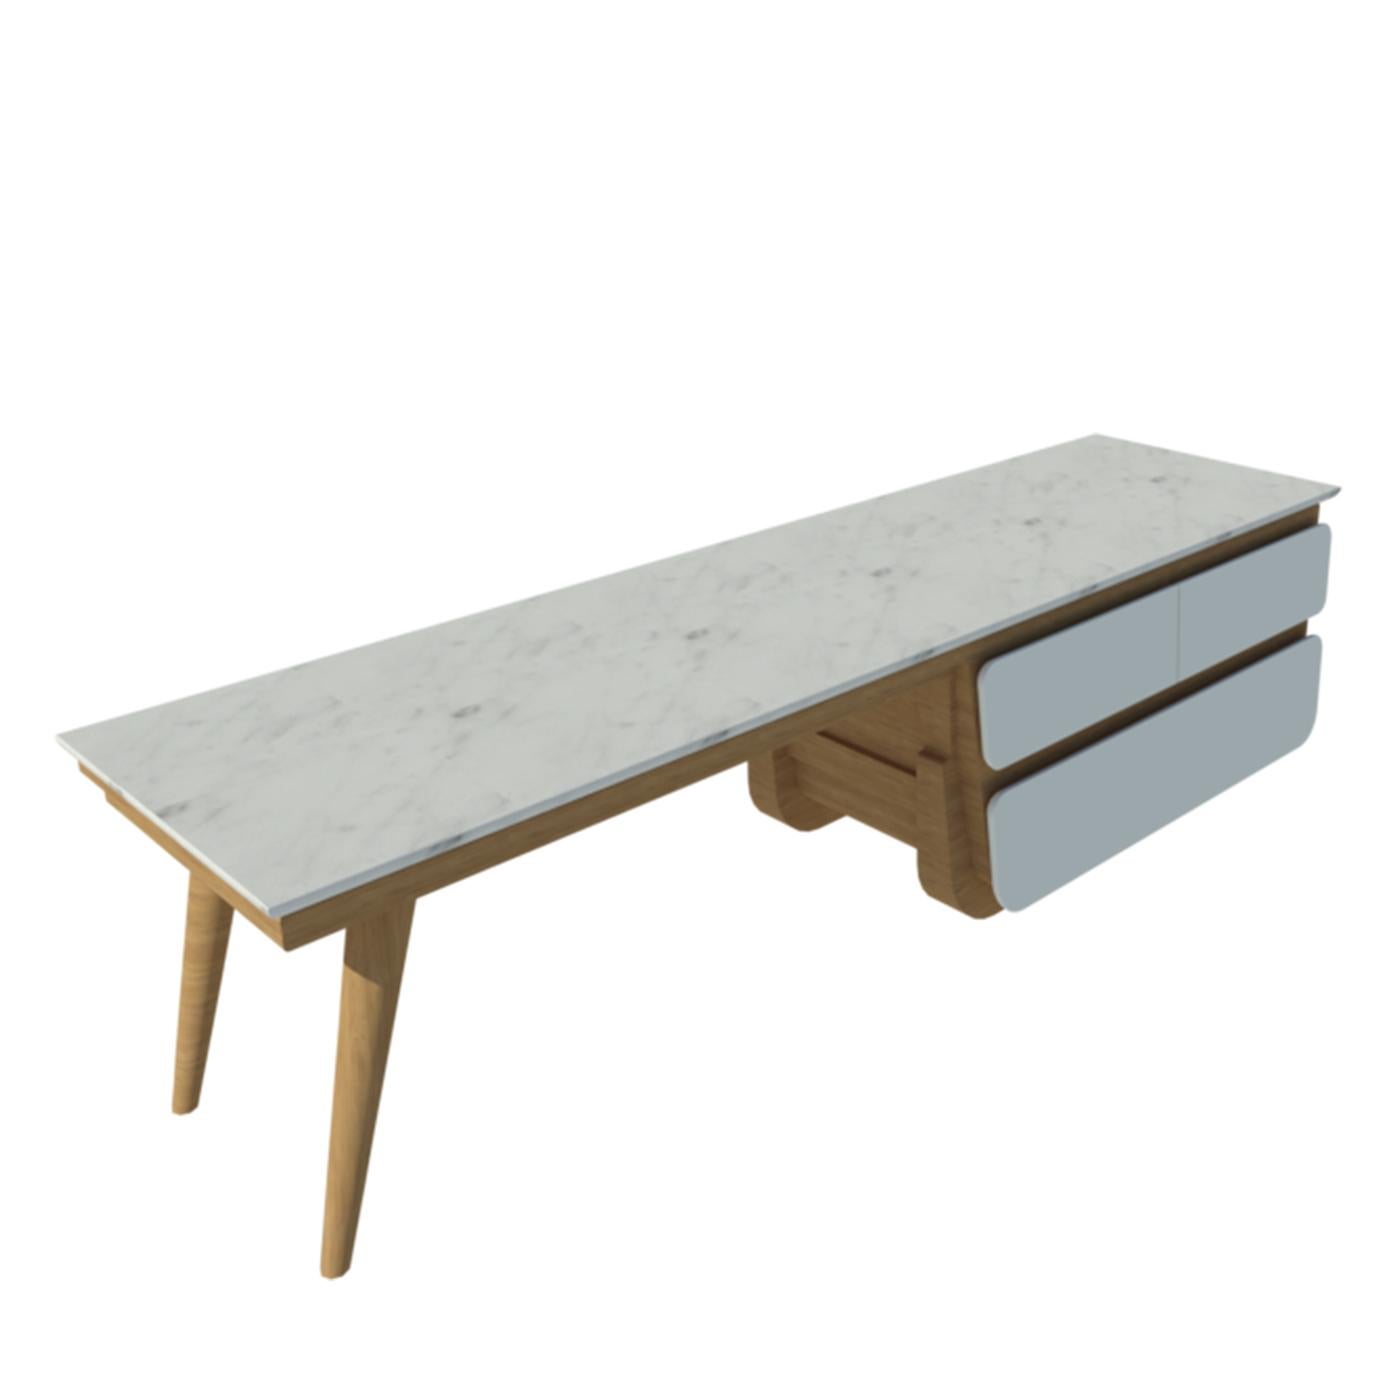 This version of the Fai bench comes in white lacquer paint and Carrara white marble top. Totally handmade with great craftsmanship, the M02 bench is made with oak veneer and hardwood. The front of the drawers has a white matt finish, while the base,